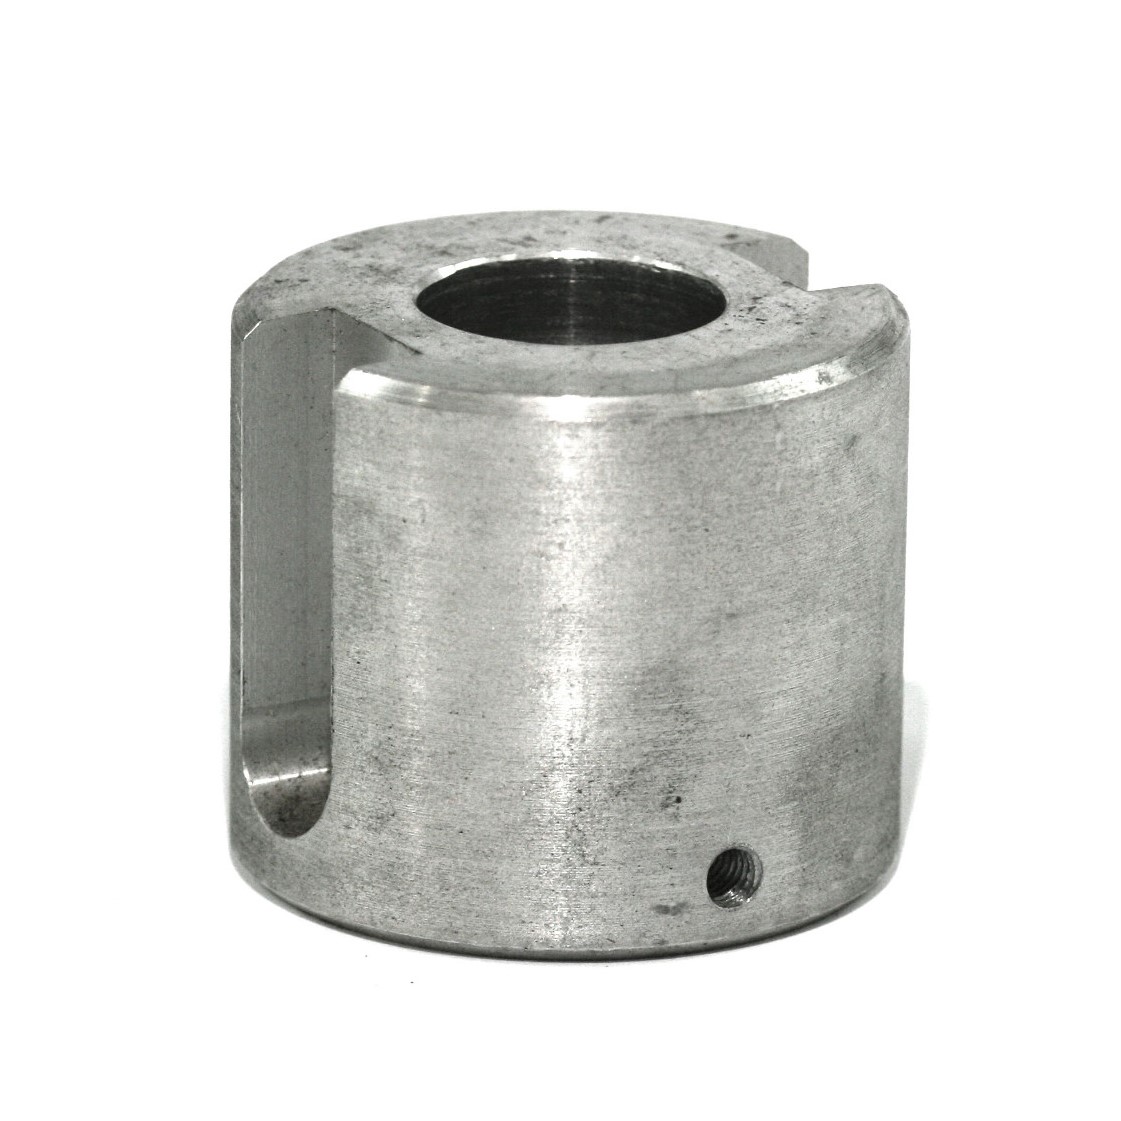 Adaptor for tower-roll 63 mm for RW 240